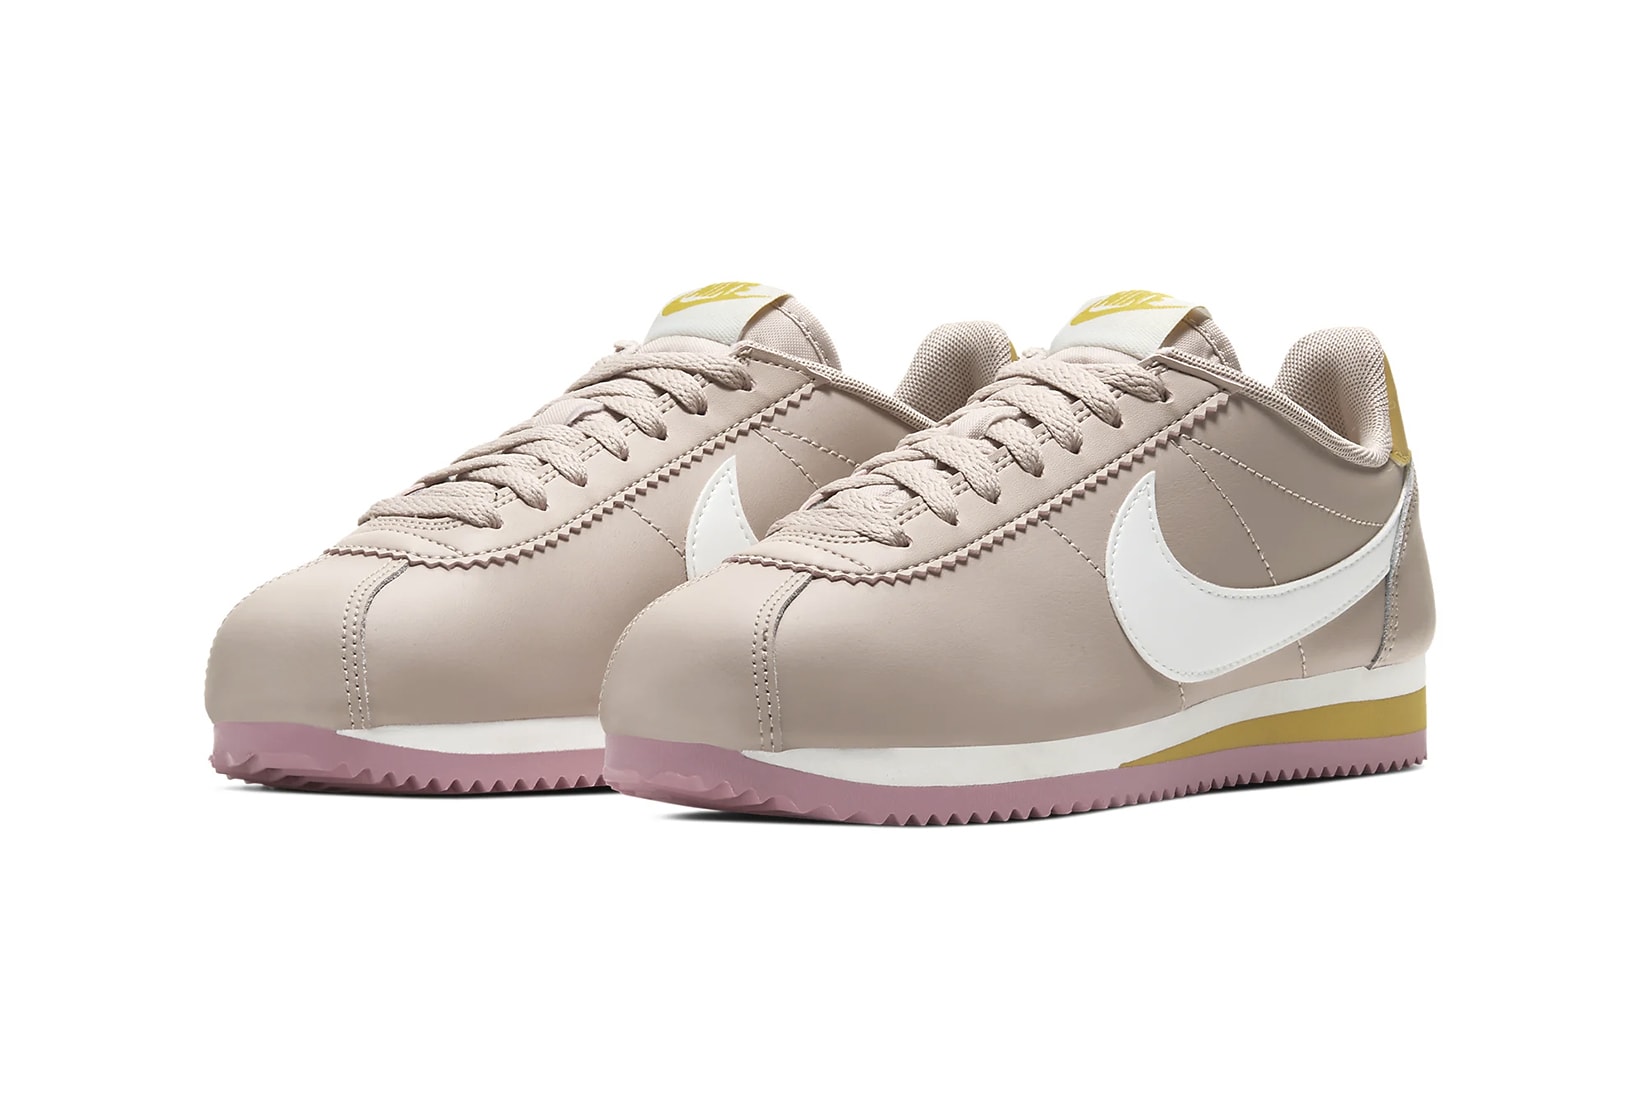 nike classic cortez womens sneakers muted pink white shoes footwear sneakerhead